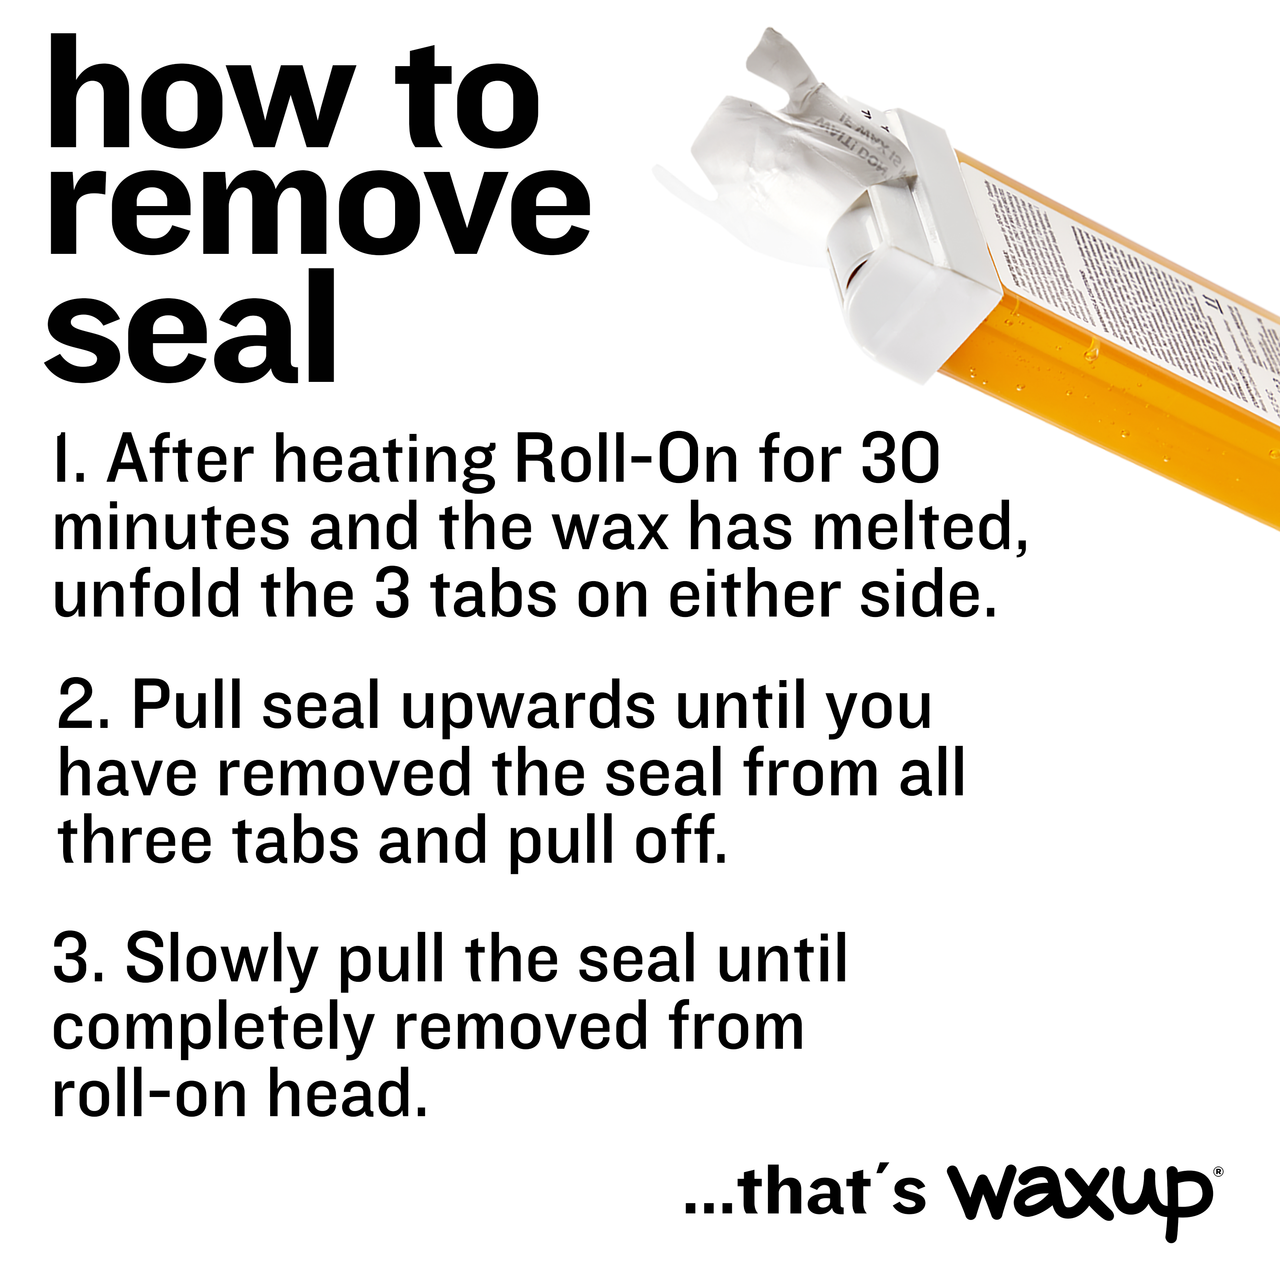 Honey Roll On Wax Cartridges 12 Pack - thatswaxup -  - Roll On Wax - waxup hair removal wax body waxing kit women and men professional waxing supplies